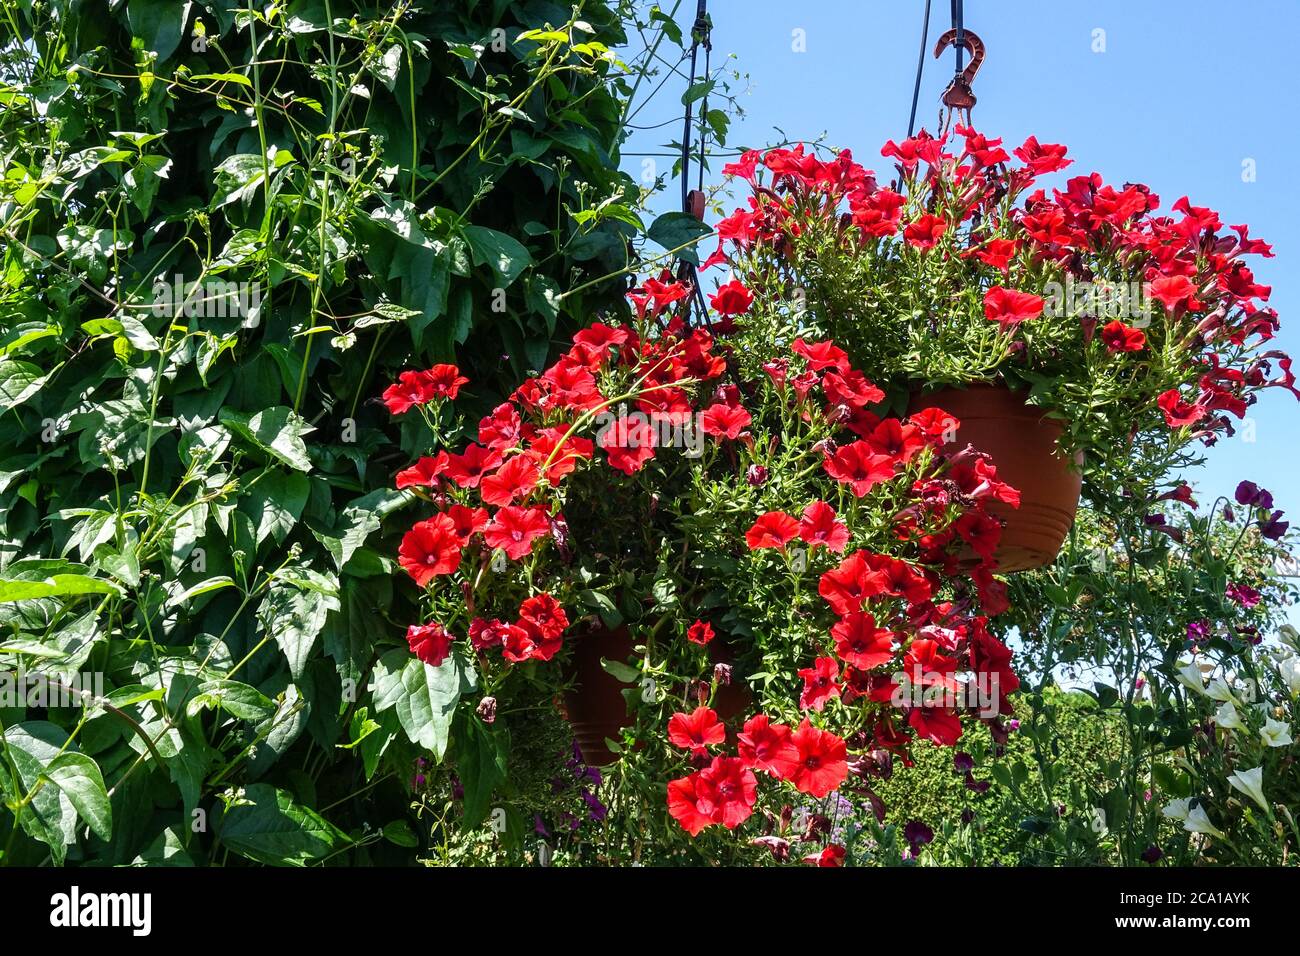 Red hanging plants blooming Stock Photo